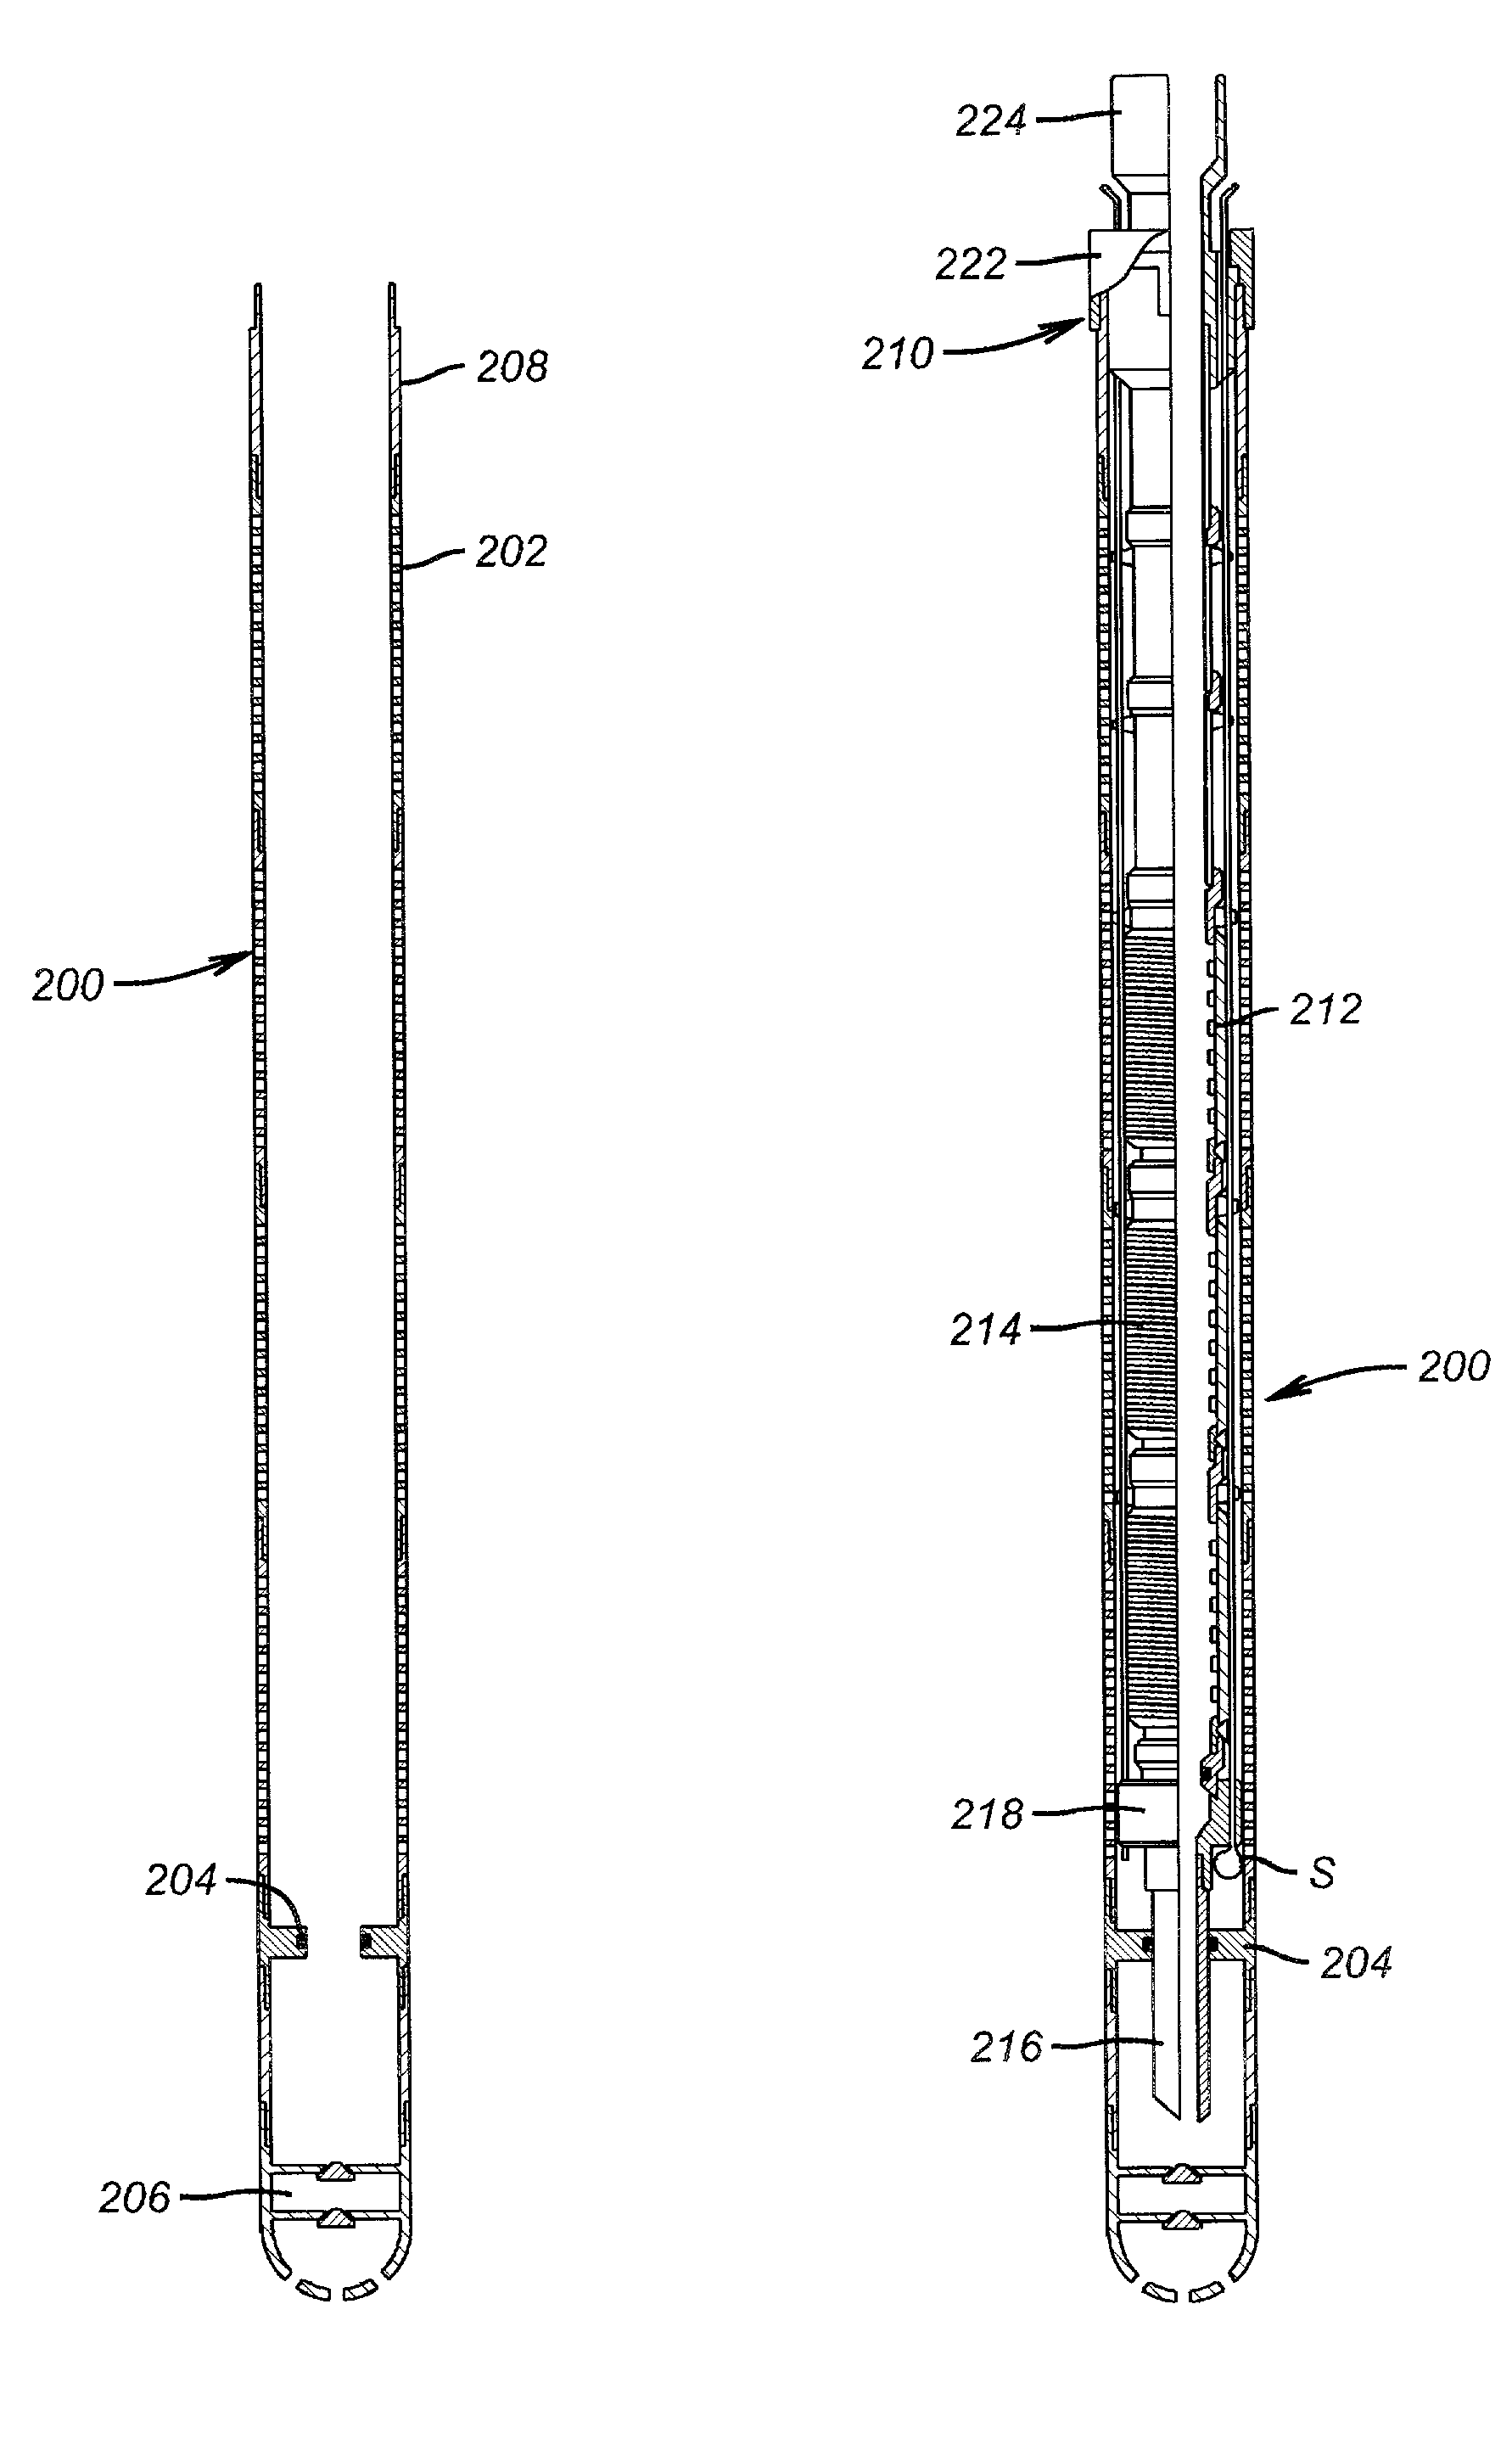 Method of providing hydraulic/fiber conduits adjacent bottom hole assemblies for multi-step completions